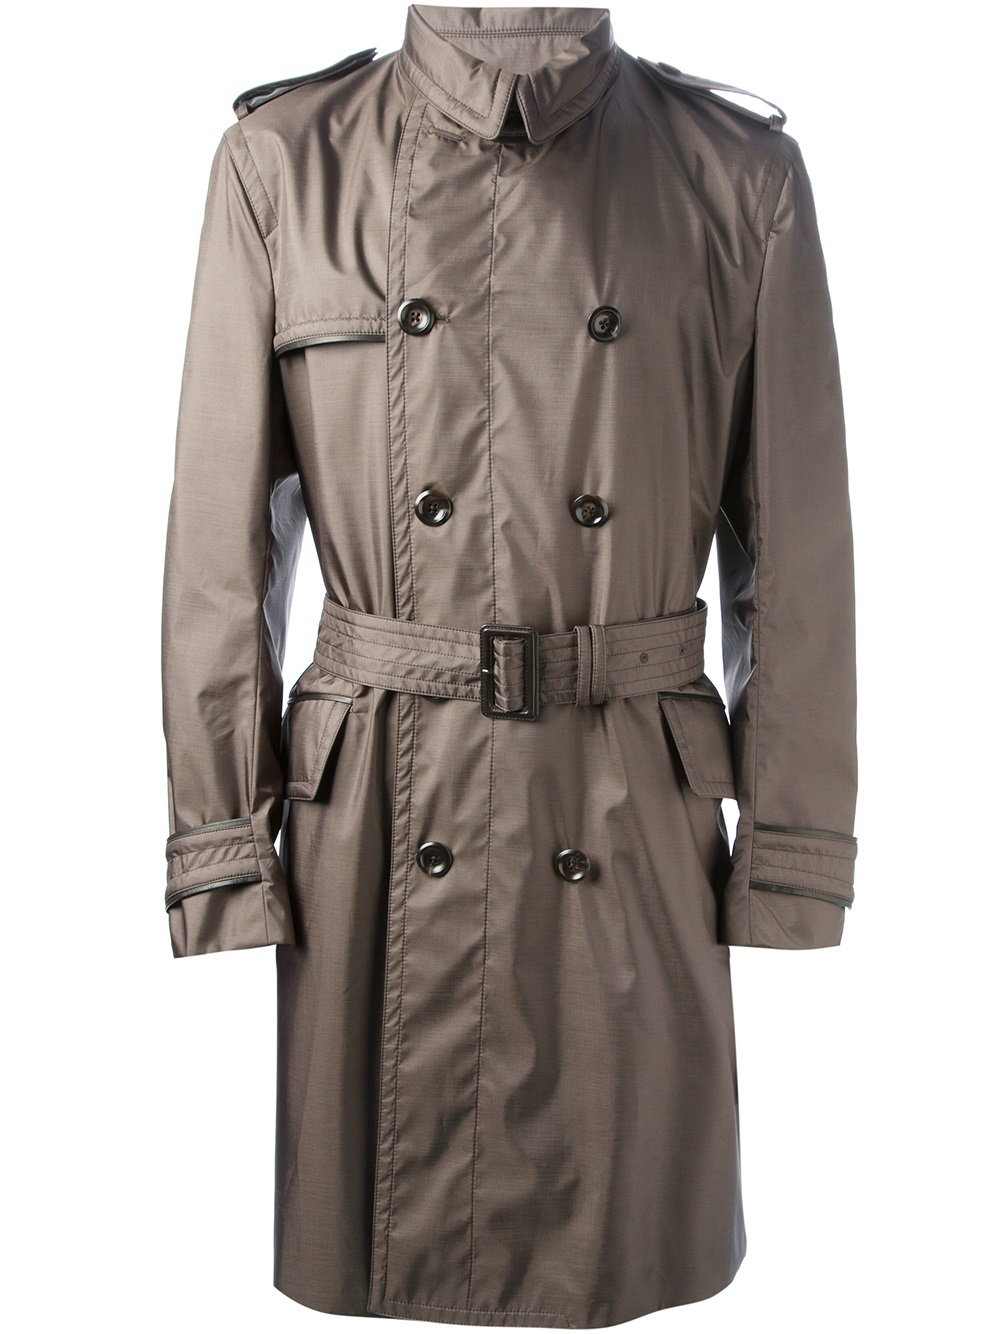 Lyst - Tom ford Belted Trench Coat in Brown for Men